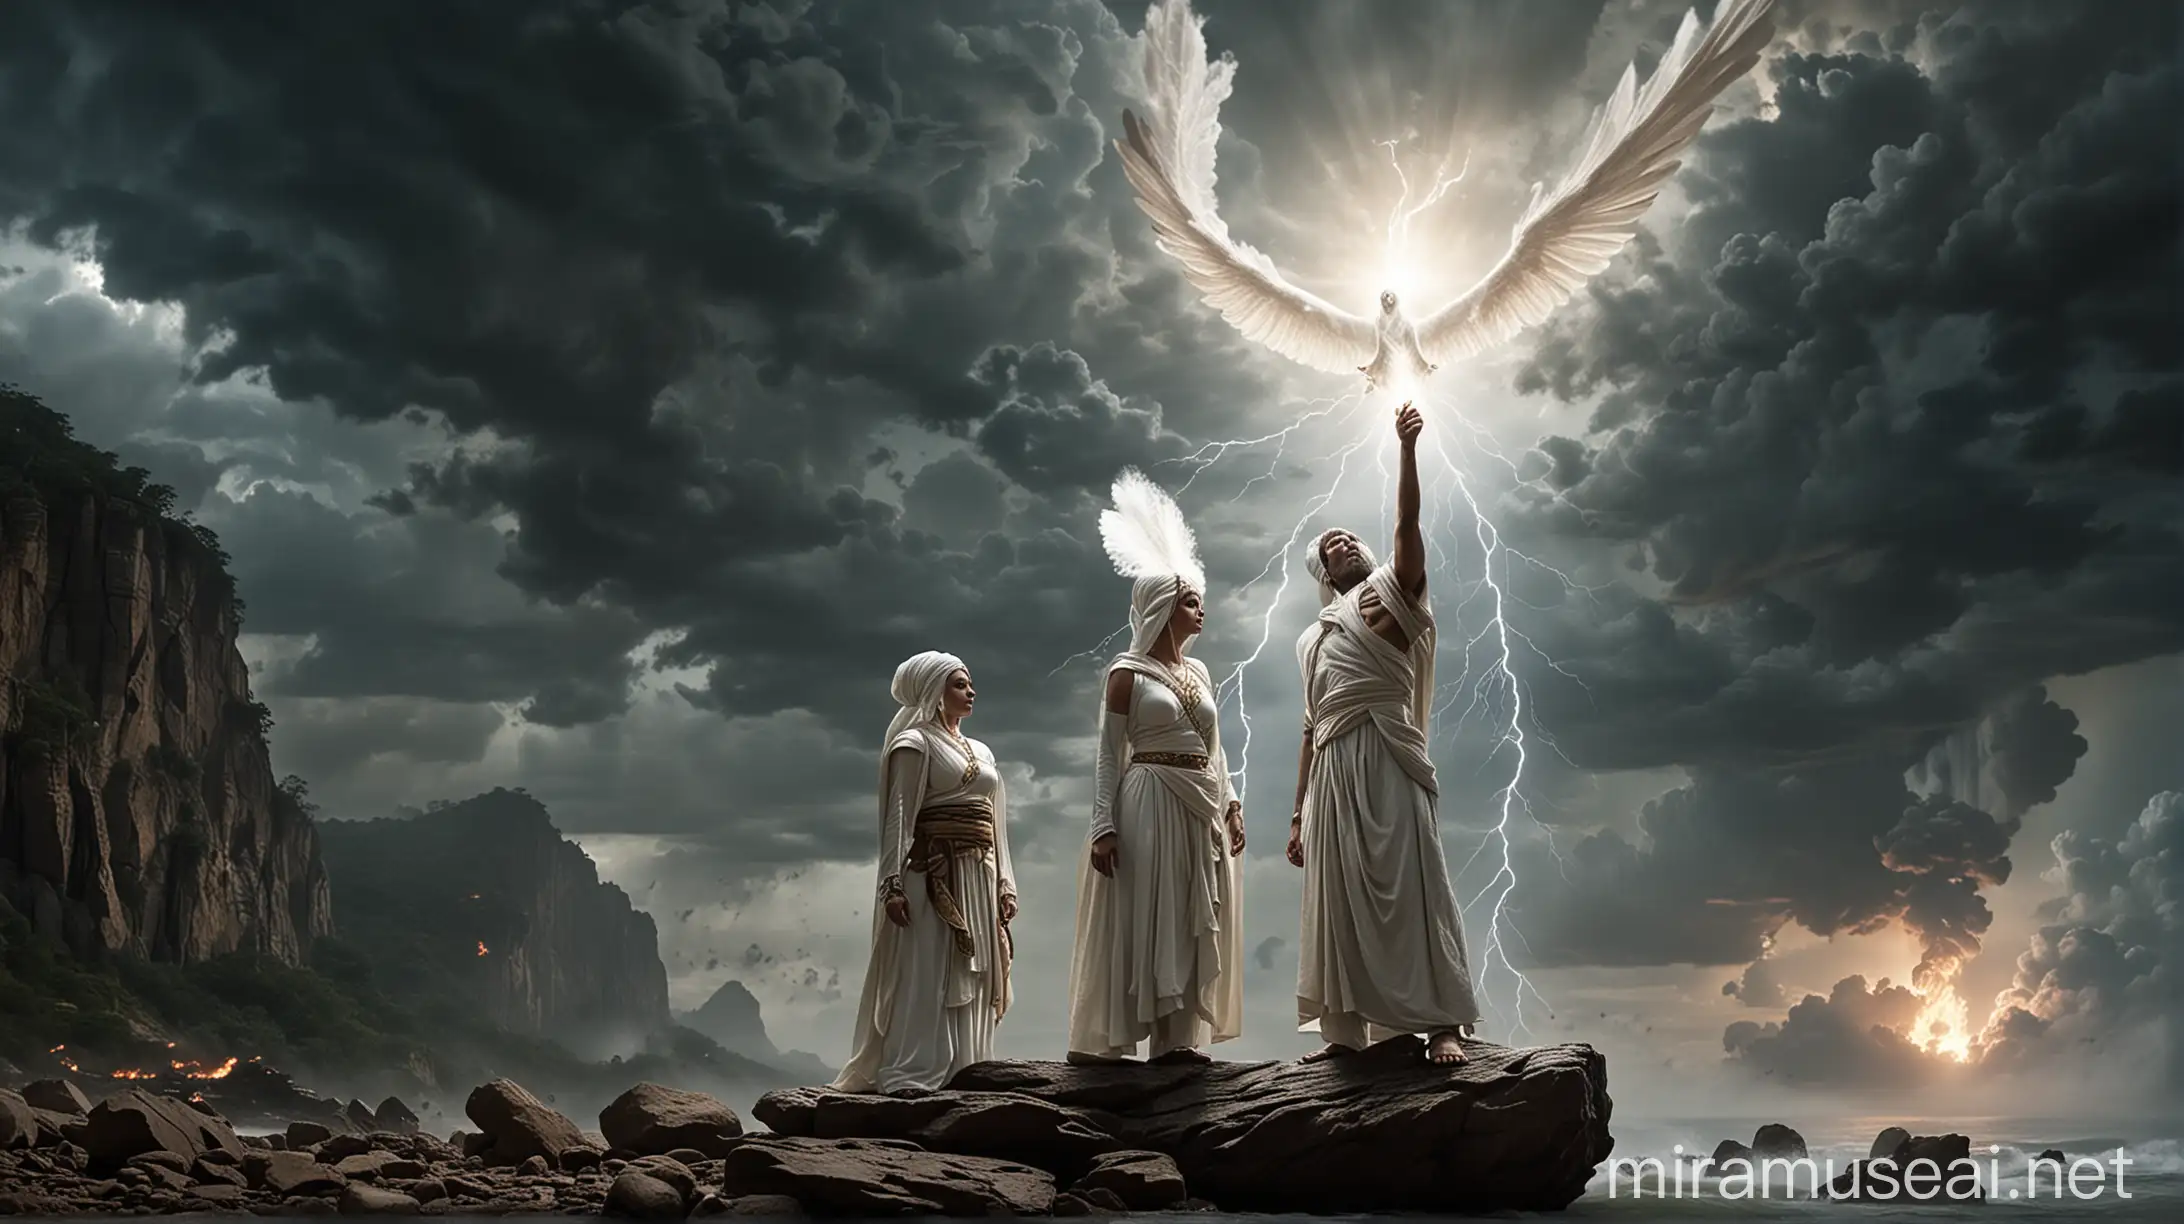 This image depicts a dramatic and intense scene with two main characters. The figure in front looks smaller and wears a white turban, and stands on a rock, looking towards the larger figure. The larger figures look angelic or divine, with wings that radiate light. A powerful flash of energy or lightning connects the two figures. The sky is dark and cloudy, adding intensity to the scene. Fire and smoke rise from below, indicating destruction or conflict.